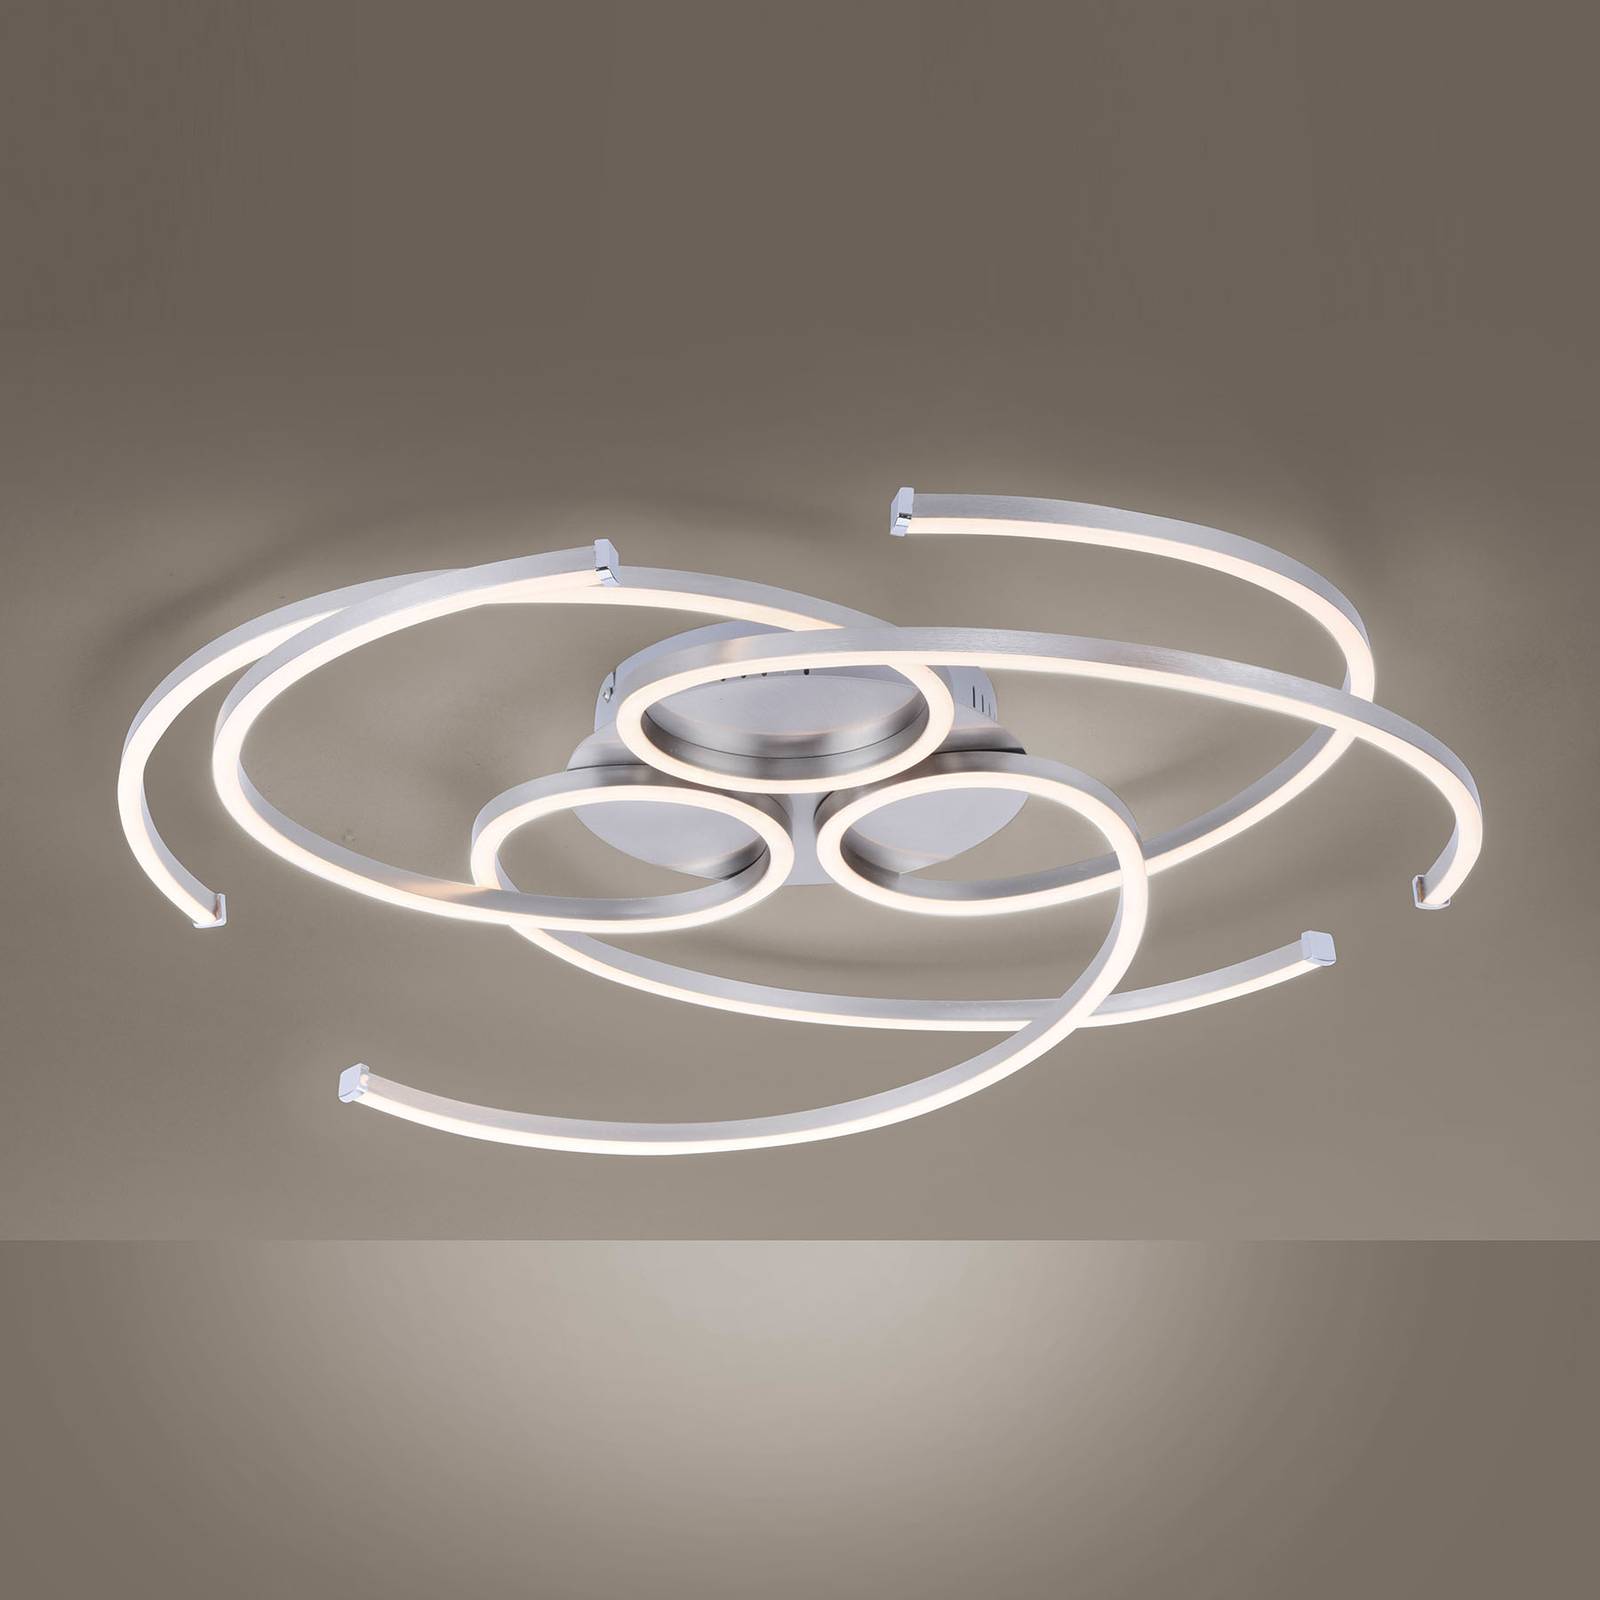 Danilo LED ceiling light, dimmable via wall switch